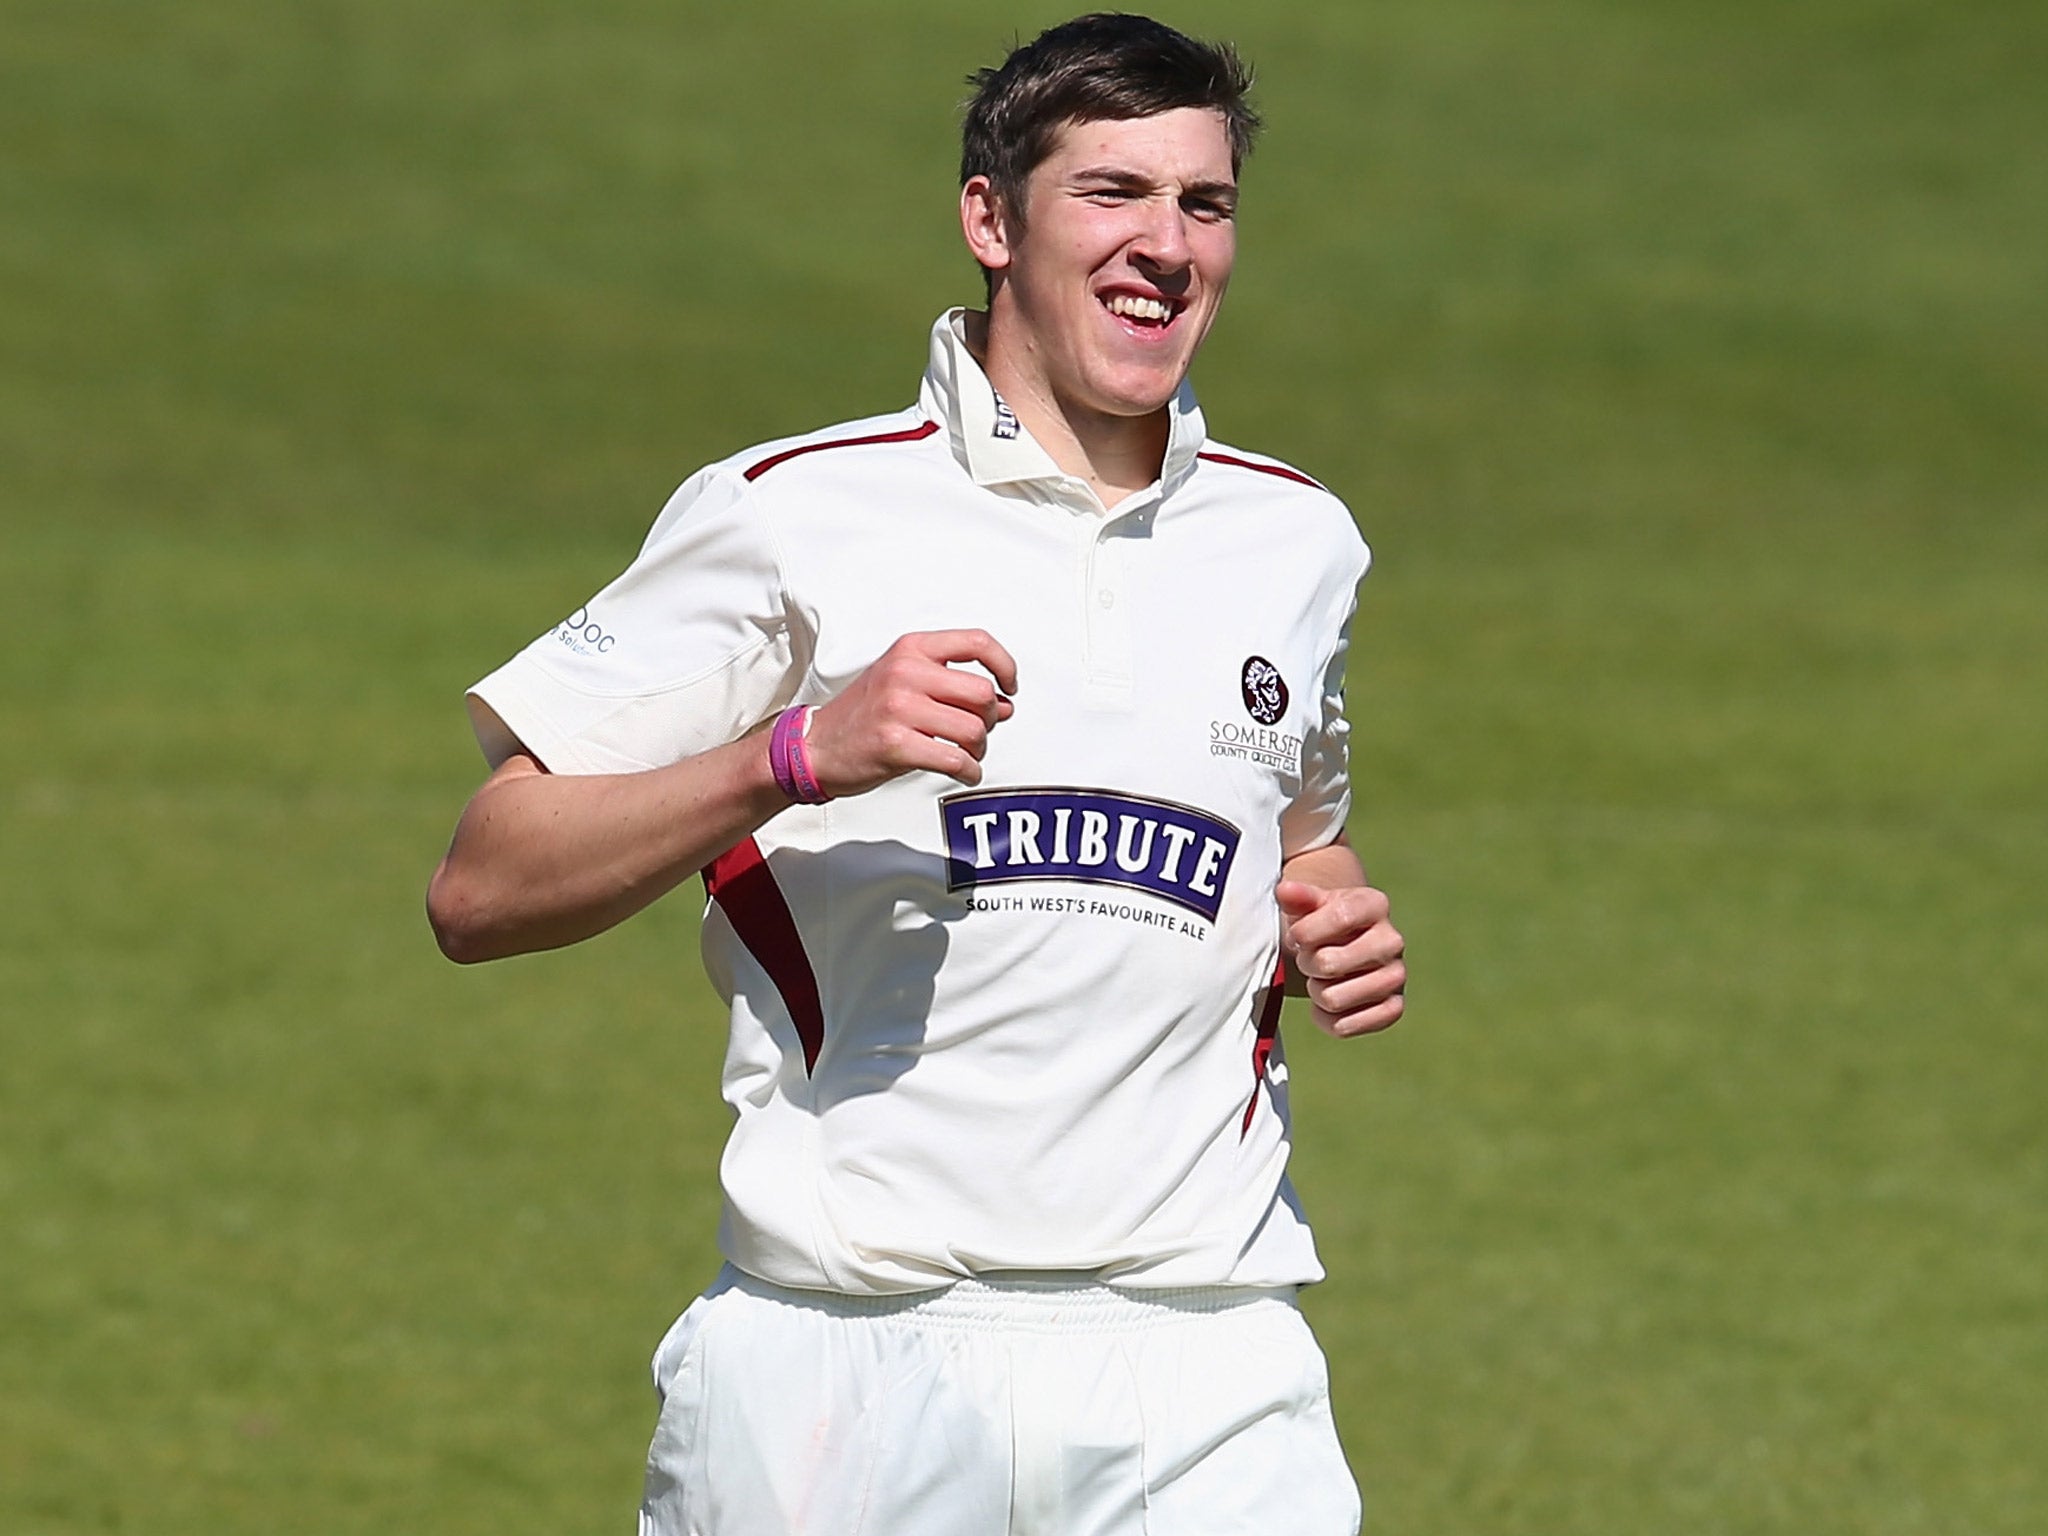 Craig Overton is returning to form after a stress fracture of the back